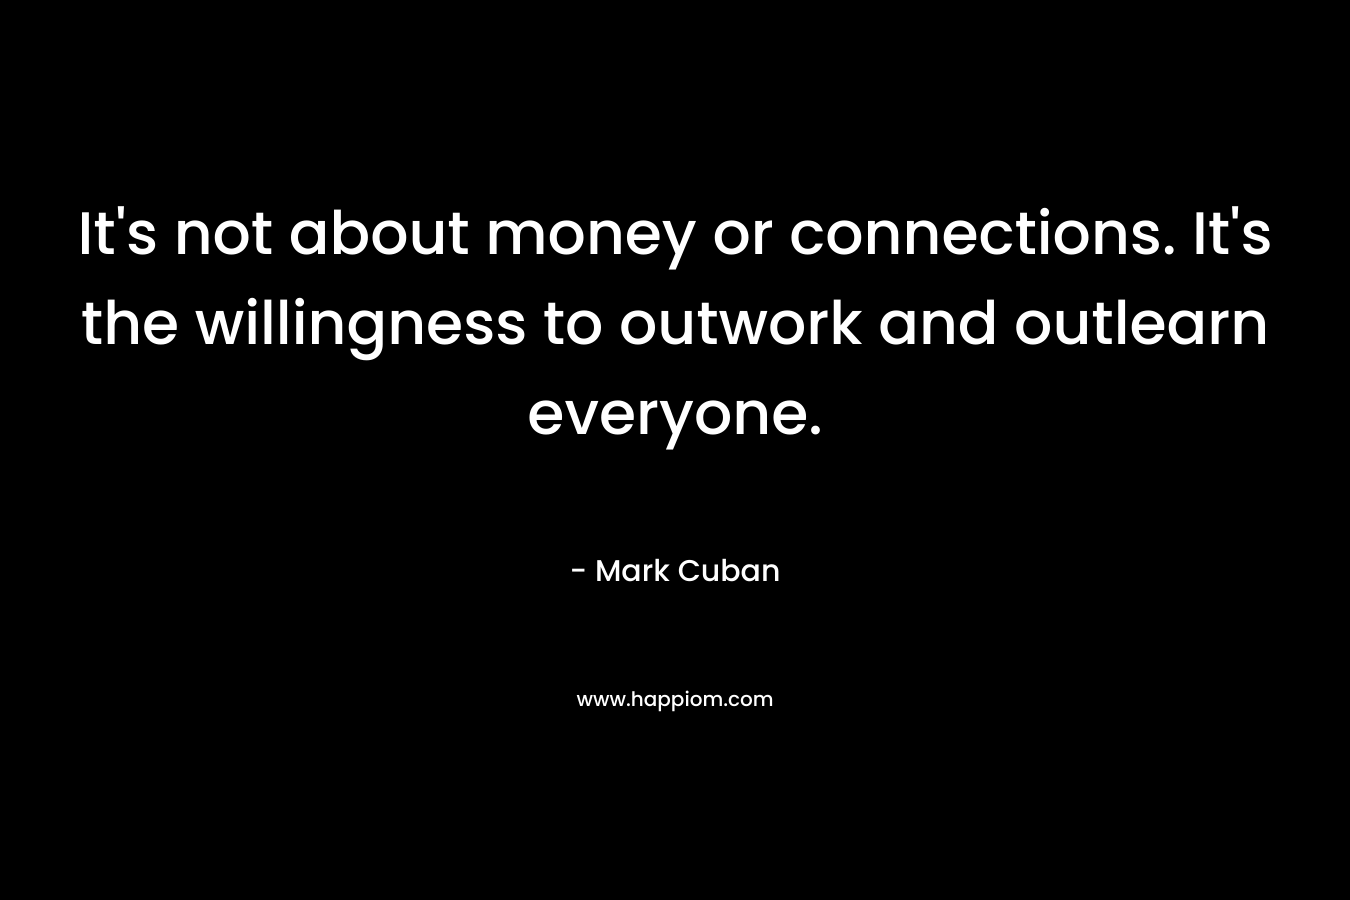 It's not about money or connections. It's the willingness to outwork and outlearn everyone.